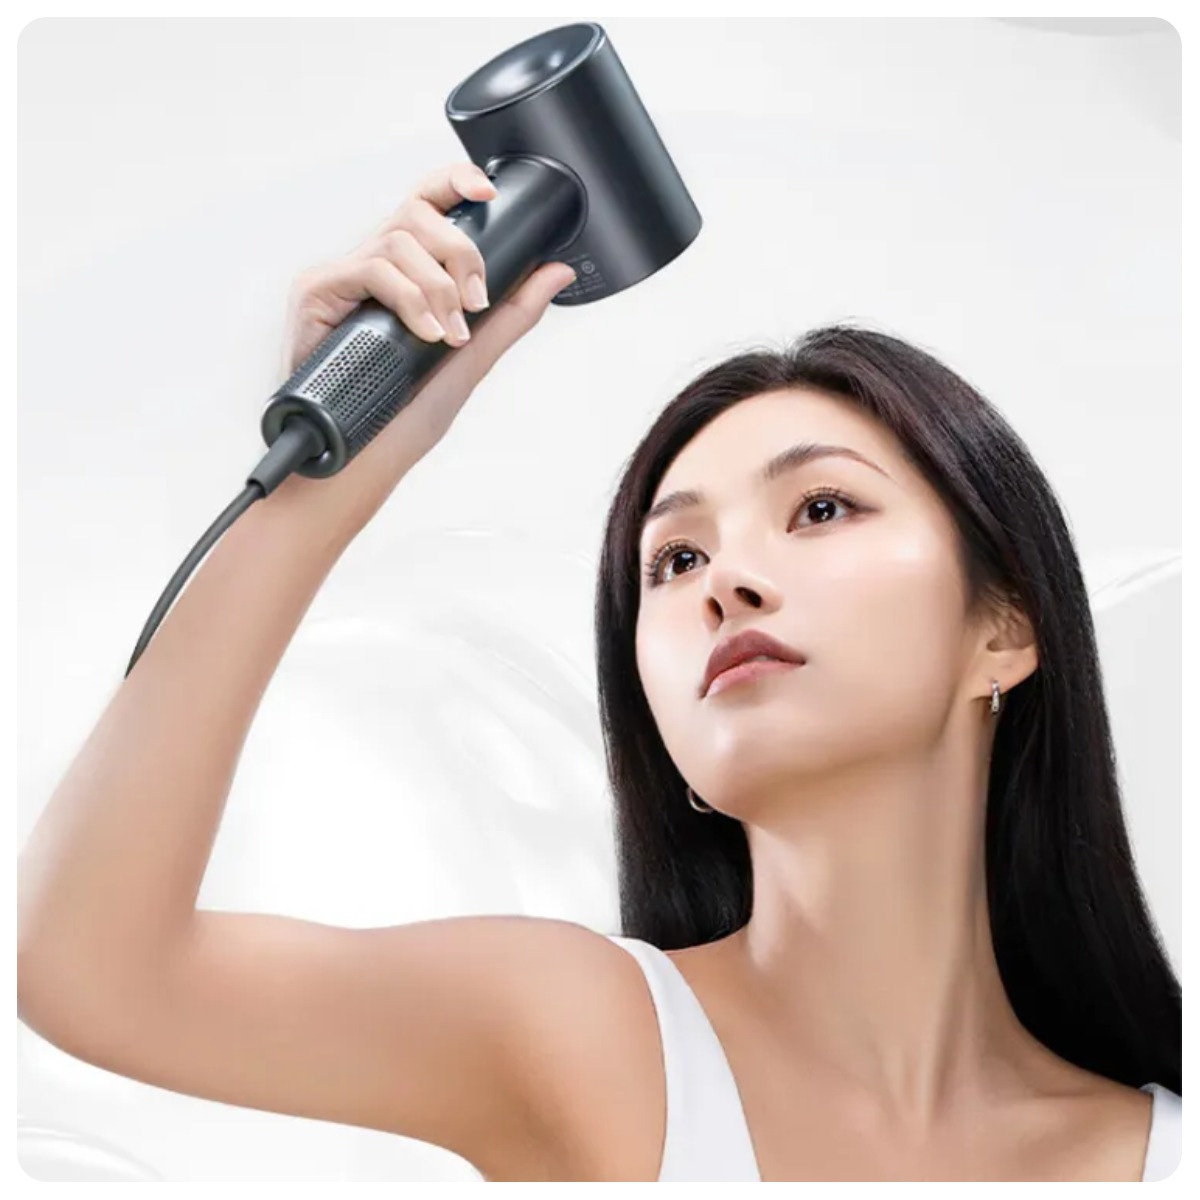 XiaoMi-ShowSee-High-speed-Hair-Dryer-A18-03